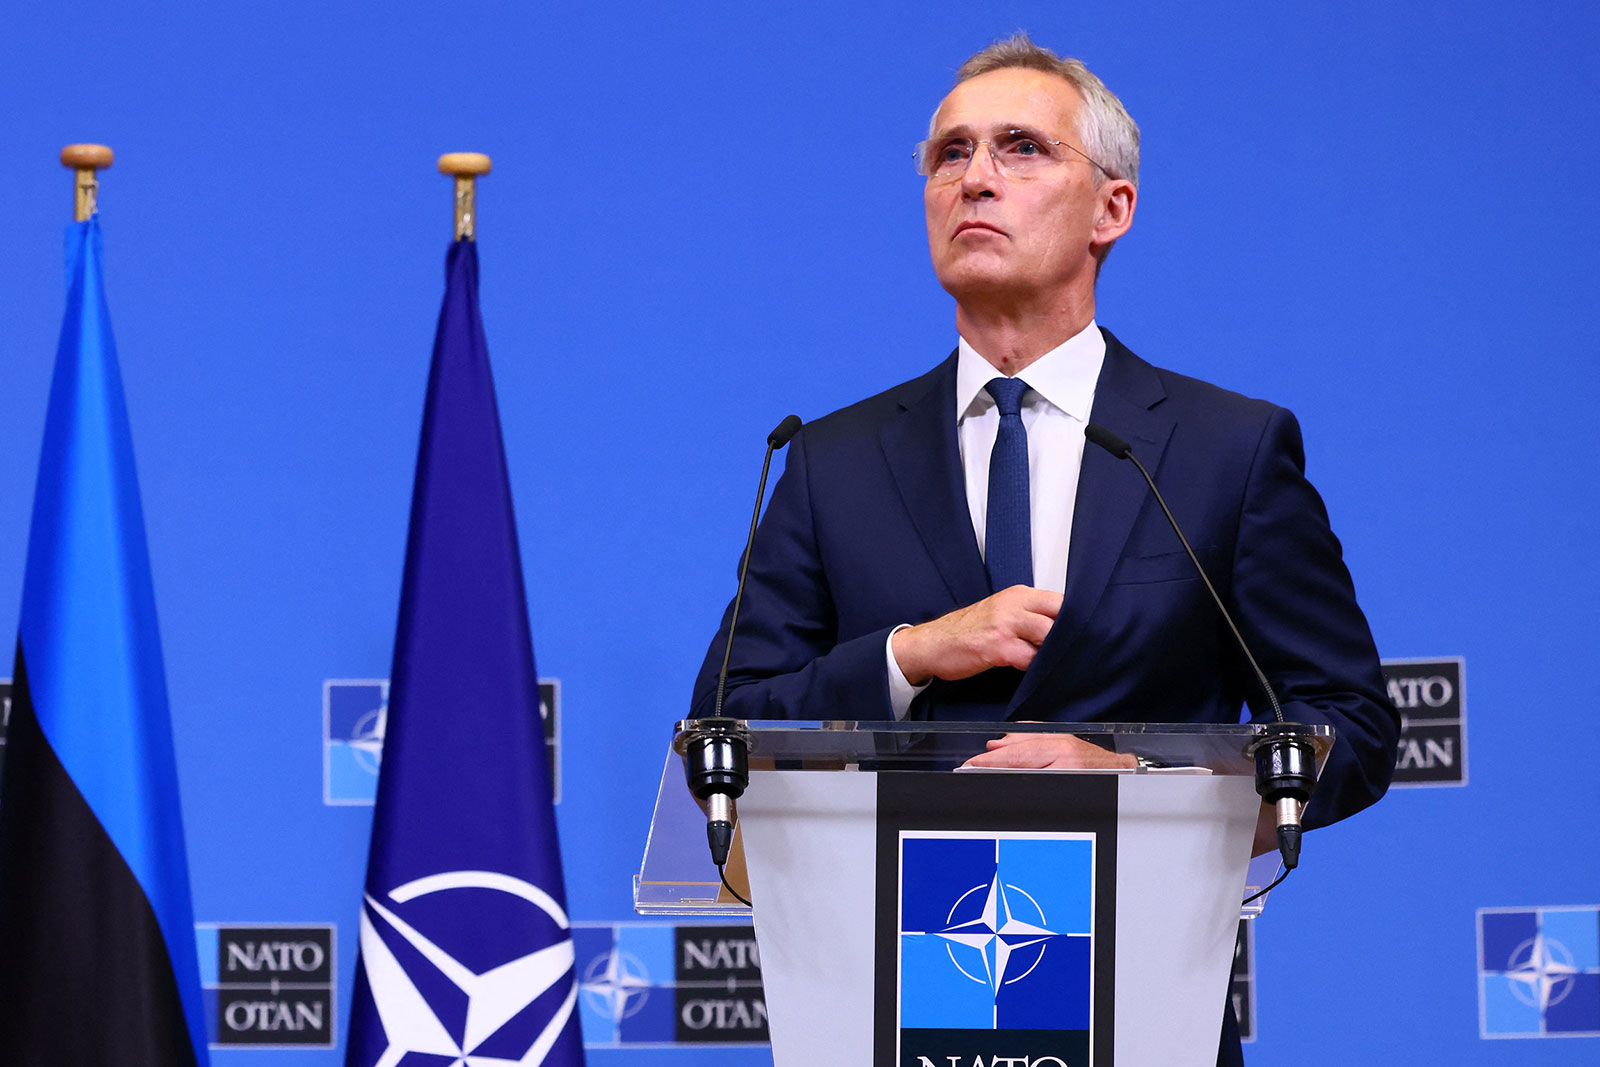 NATO Secretary-General Jens Stoltenberg is seen during a press conference at the NATO Headquarters in Brussels, Belgium on Wednesday, June 28.